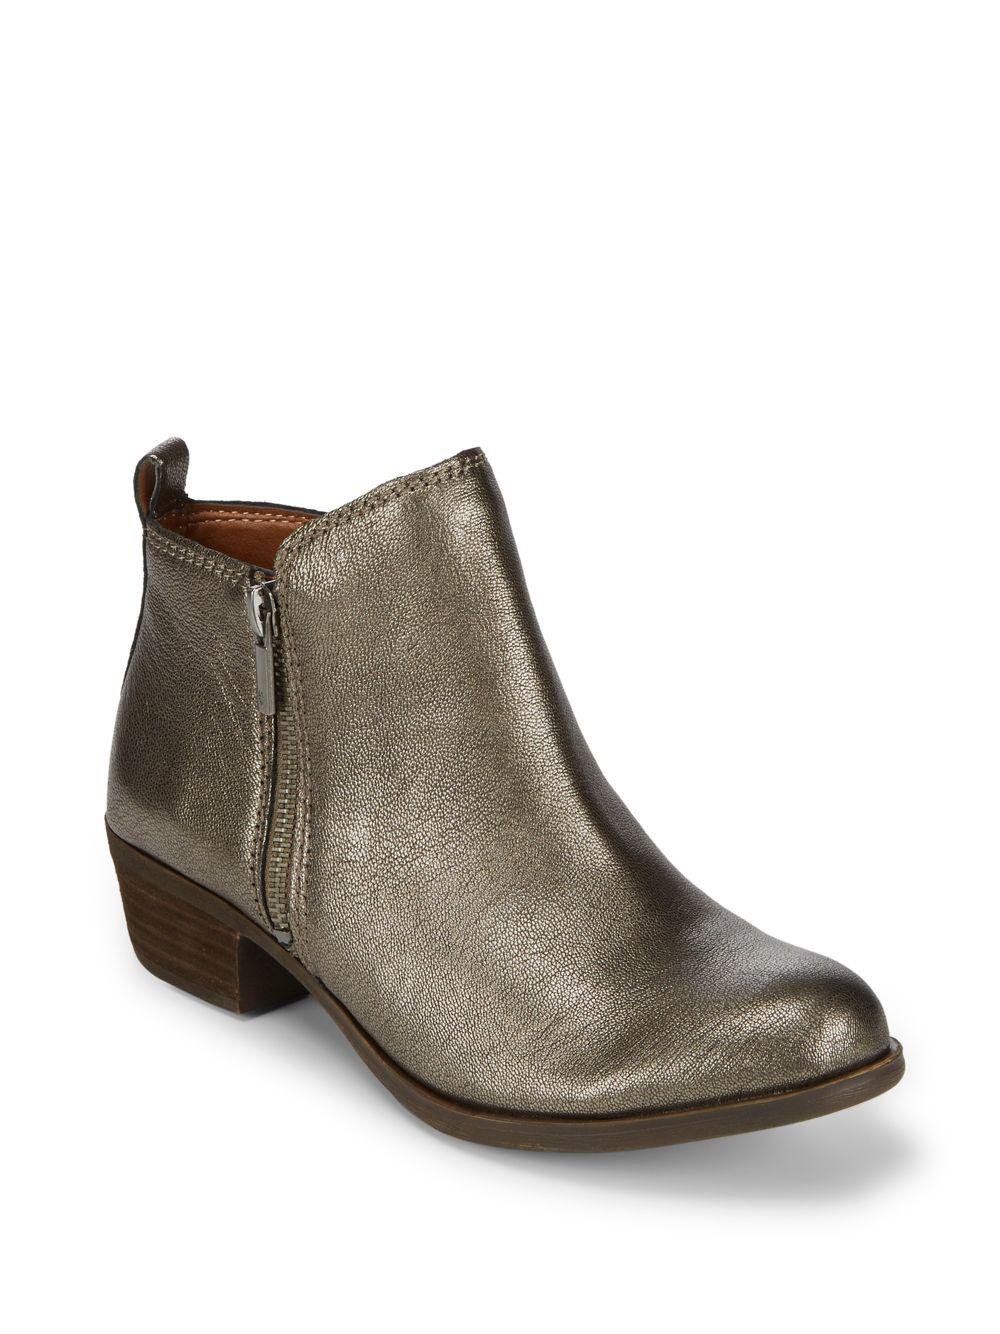 Lucky Brand Basel Leather Booties in Metallic - Lyst